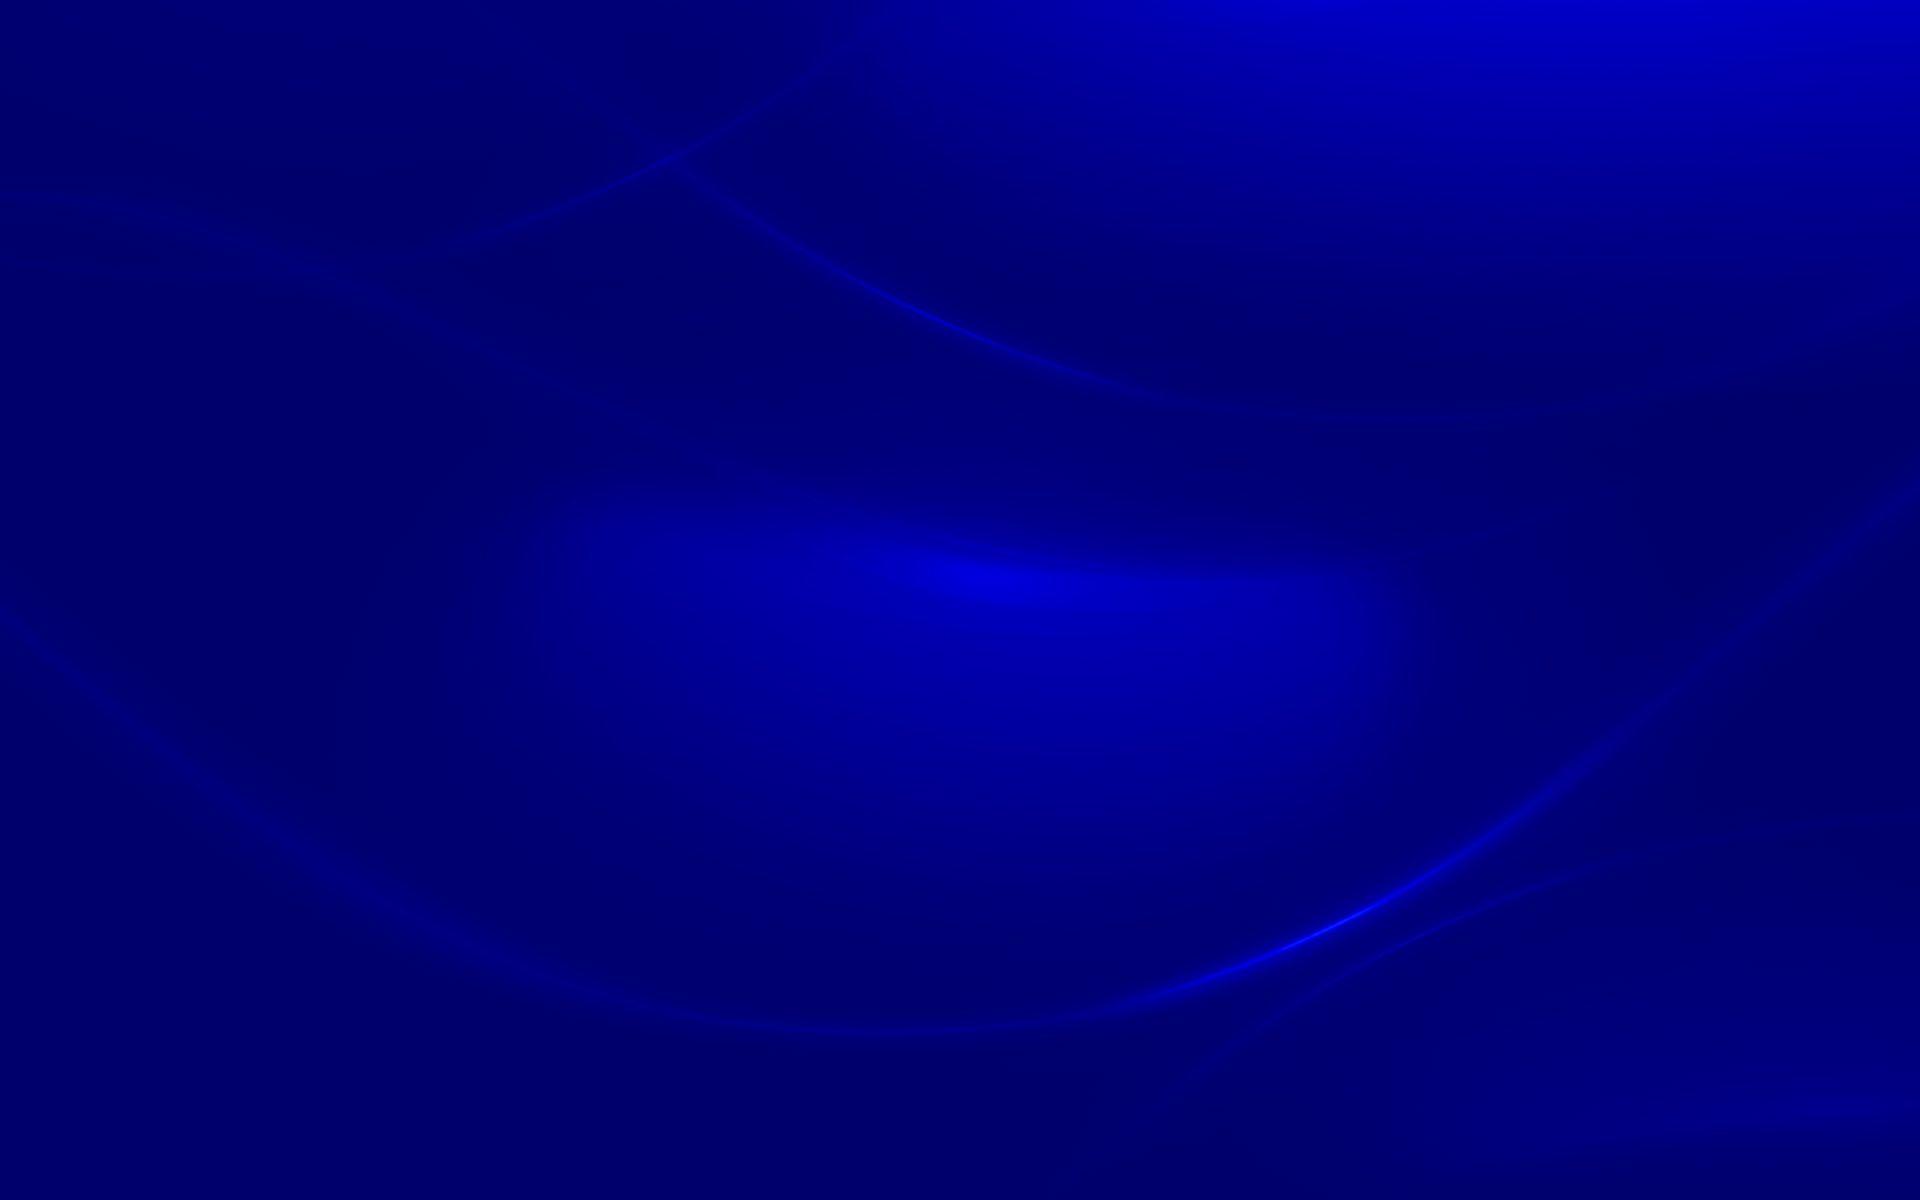 Windows 7 Wallpapers Blue wallpapers